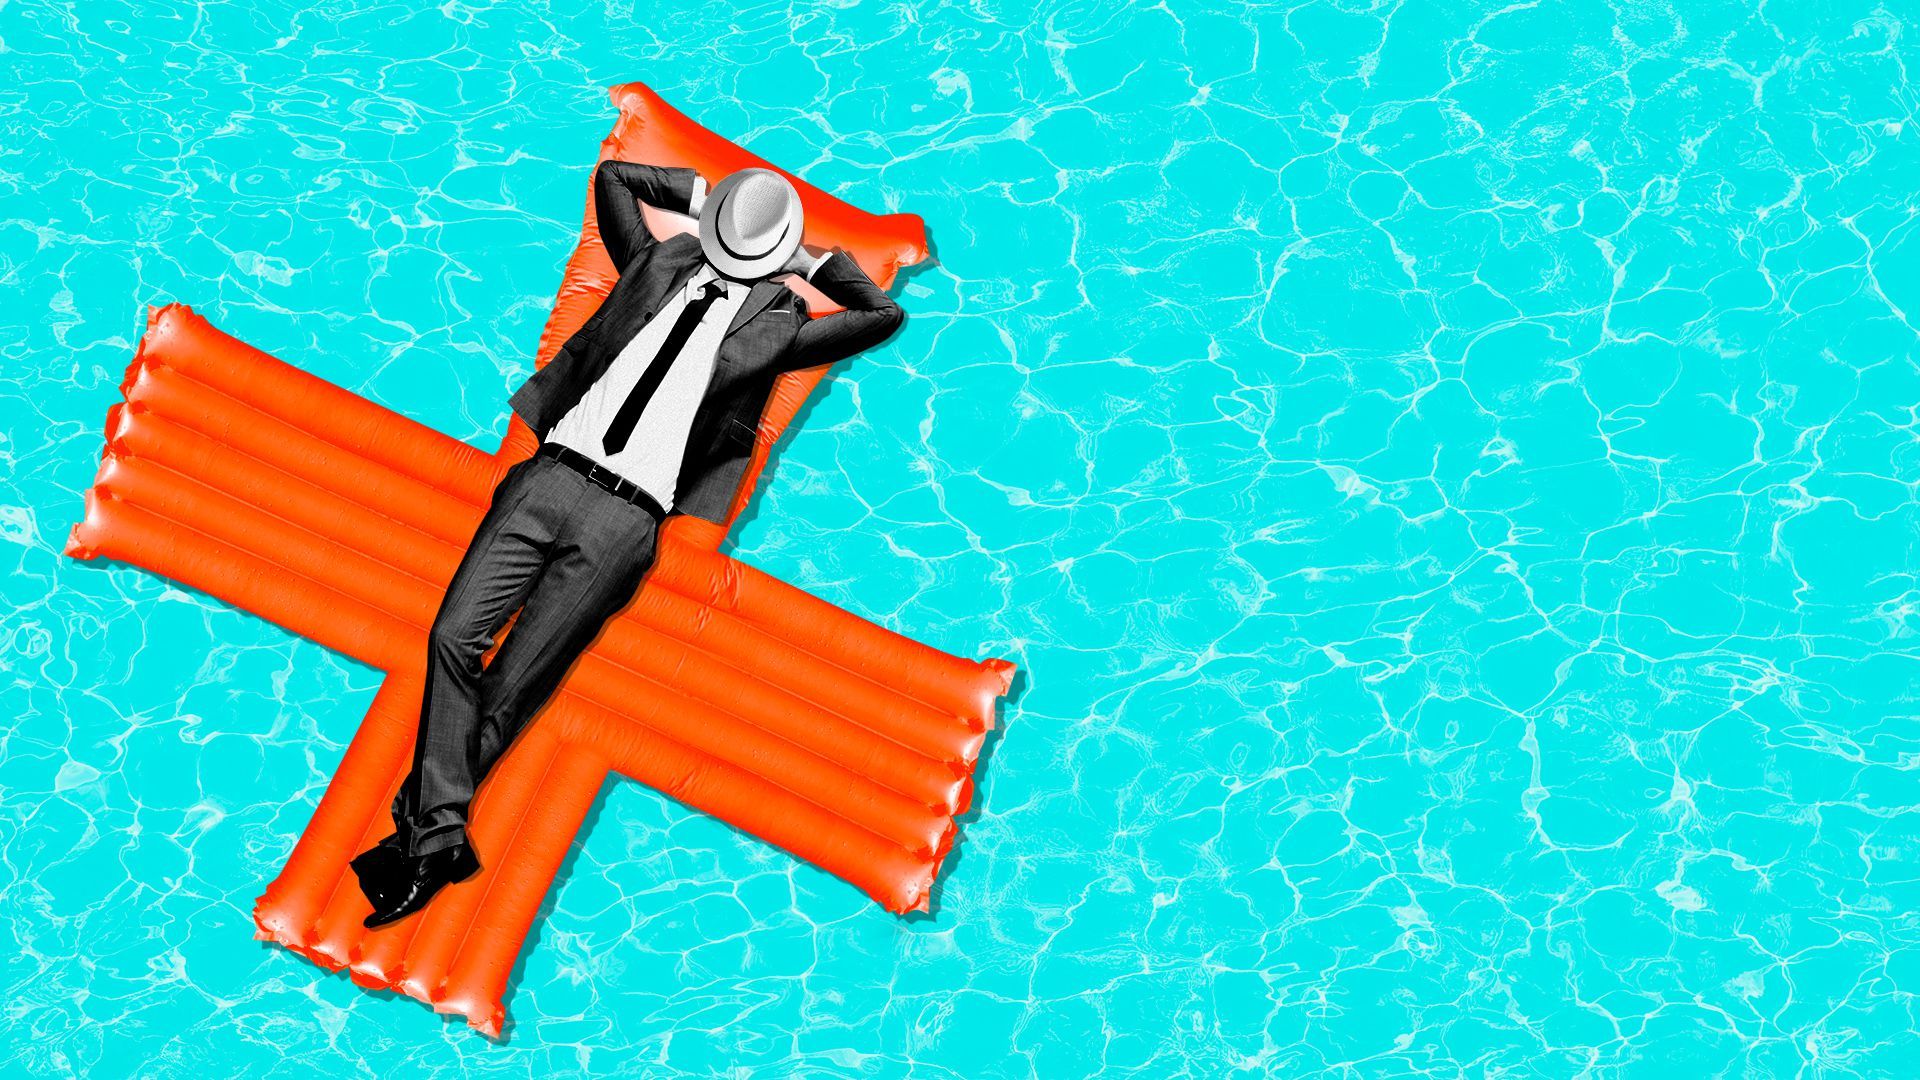 Illustration of a man in a suit on a health cross shaped floating device relaxing. 